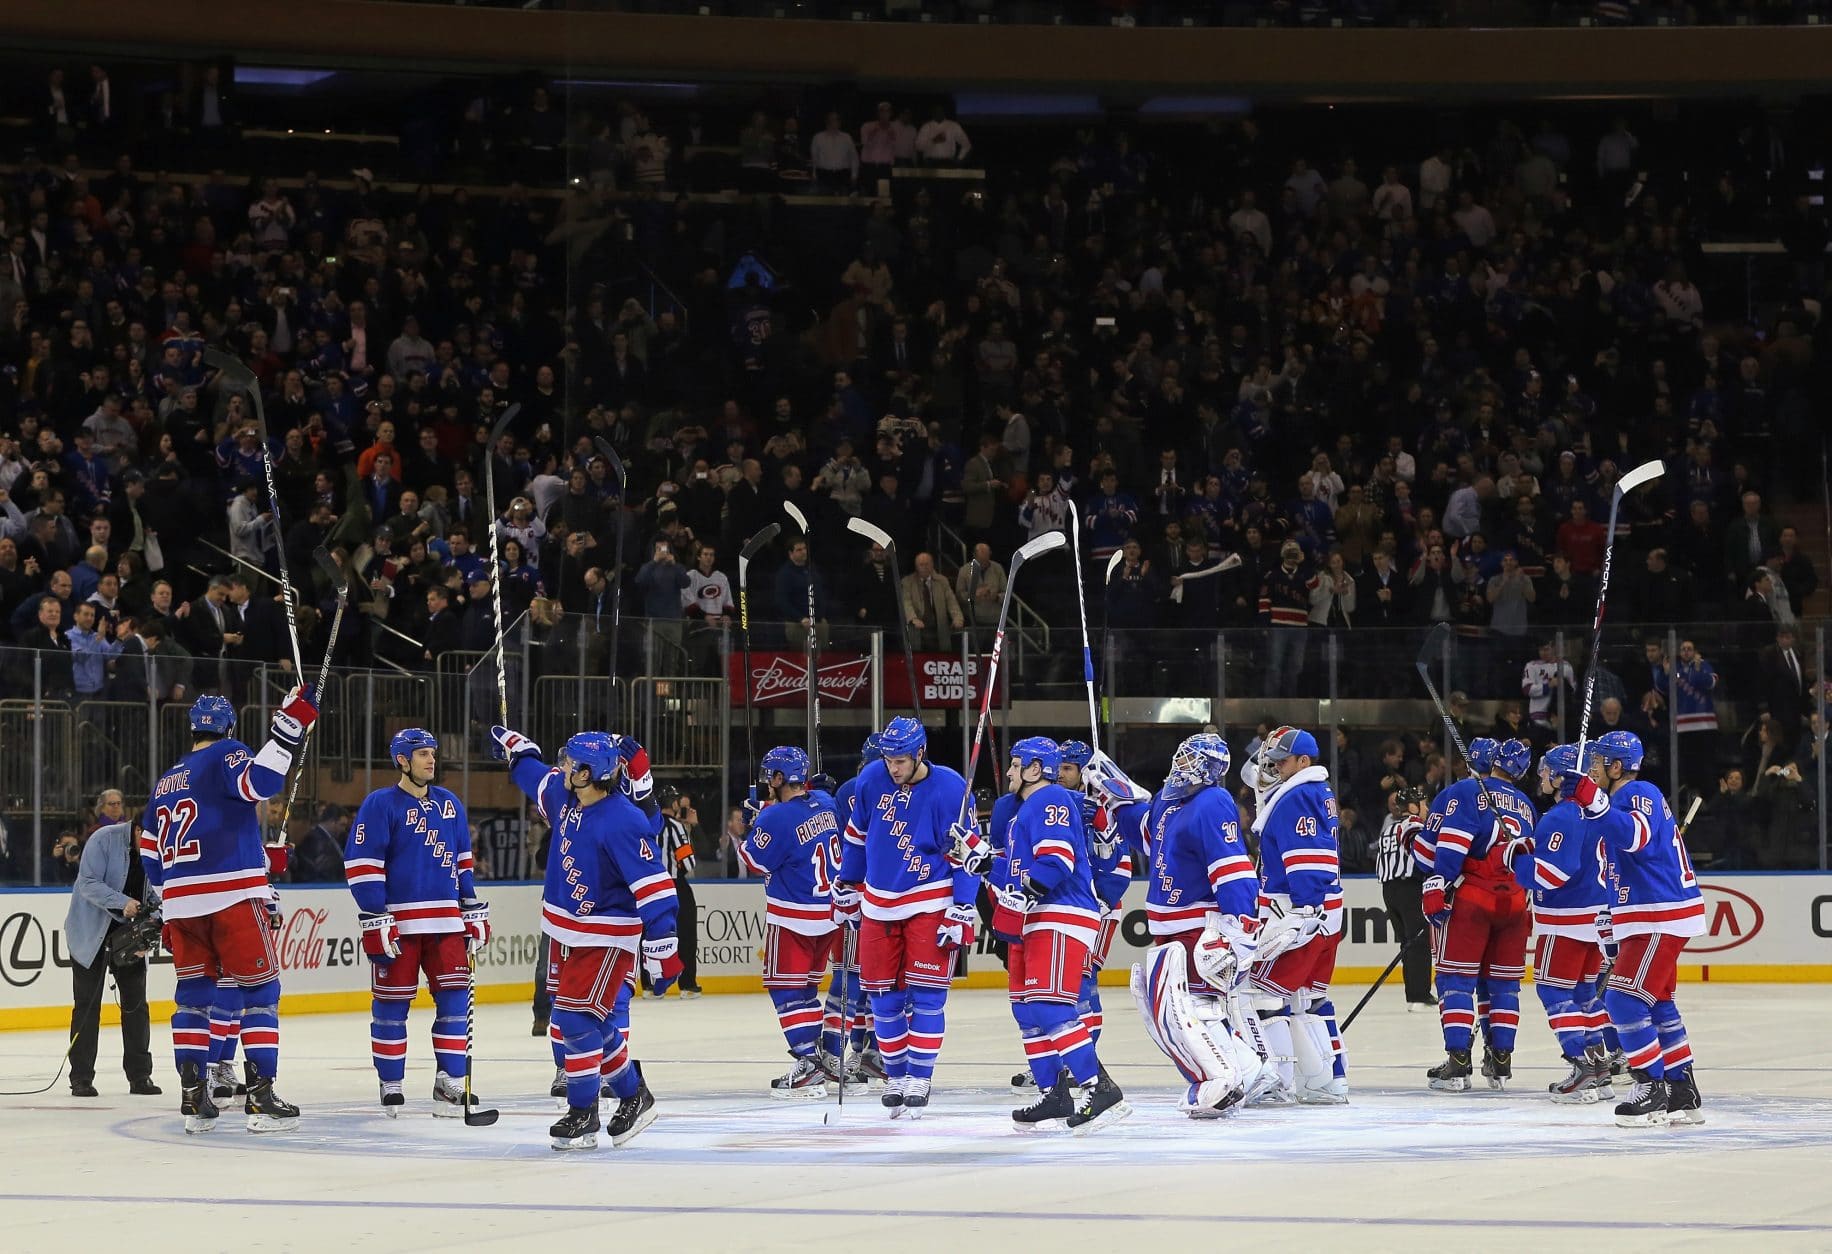 New York Rangers Hold Off the Arizona Coyotes to Win Home Opener